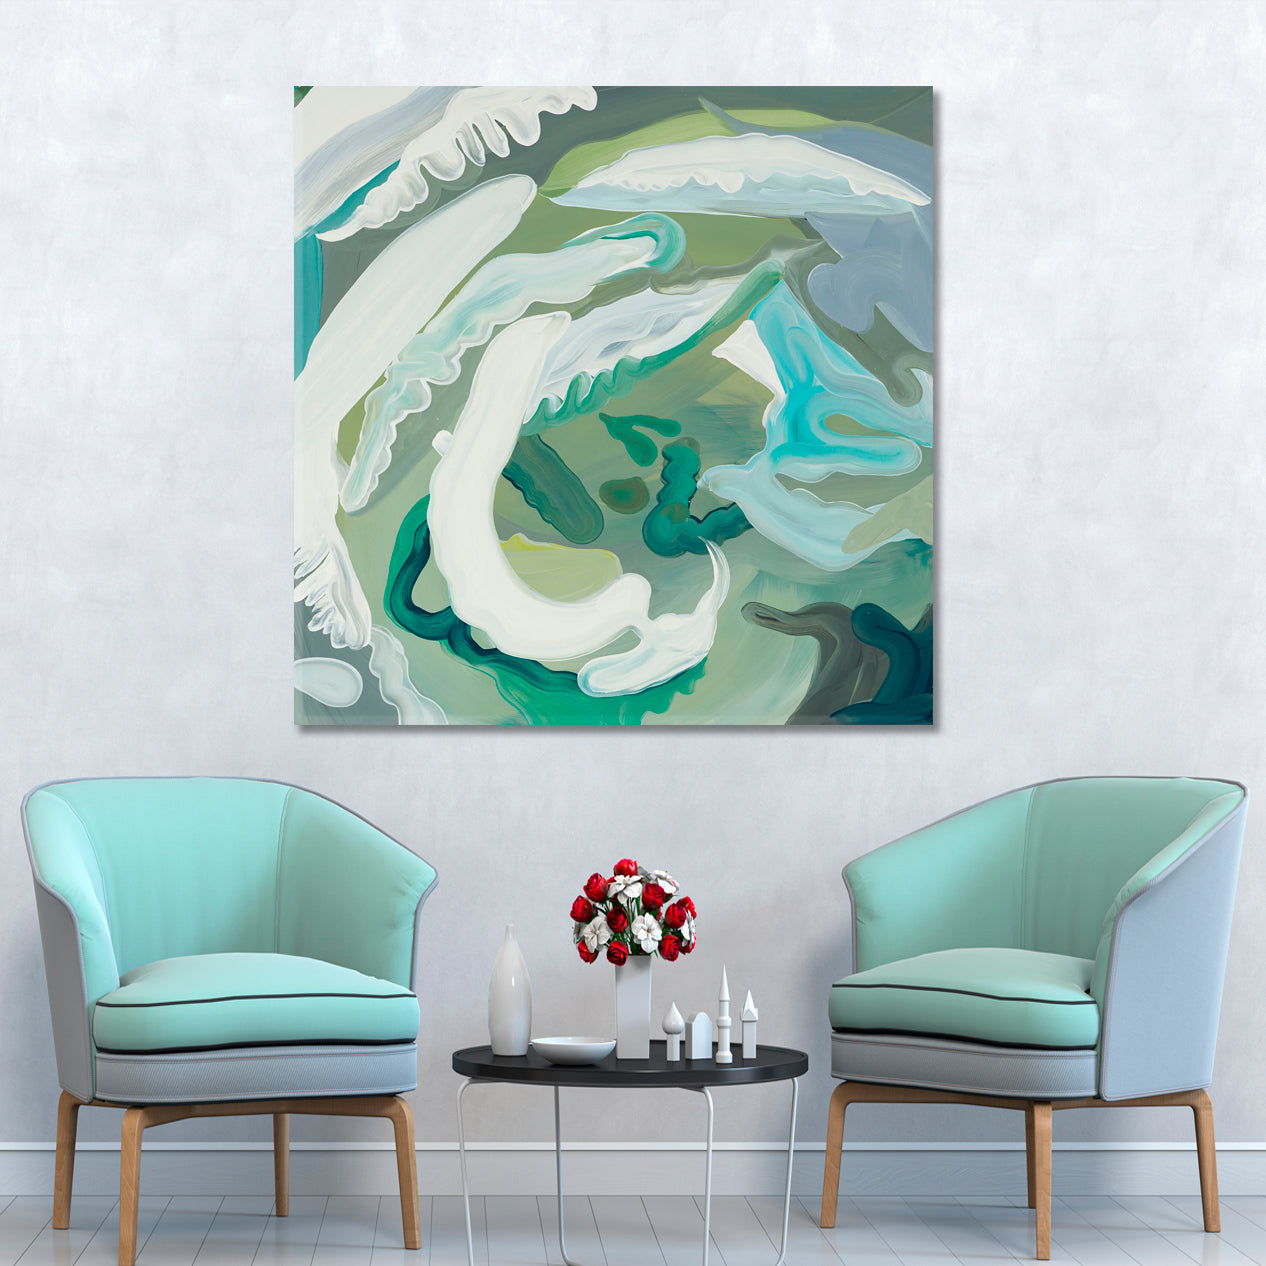 Modern Abstract Contemporary Teal Turquoise Mint Abstract Art Print Artesty 1 Panel 12"x12" 